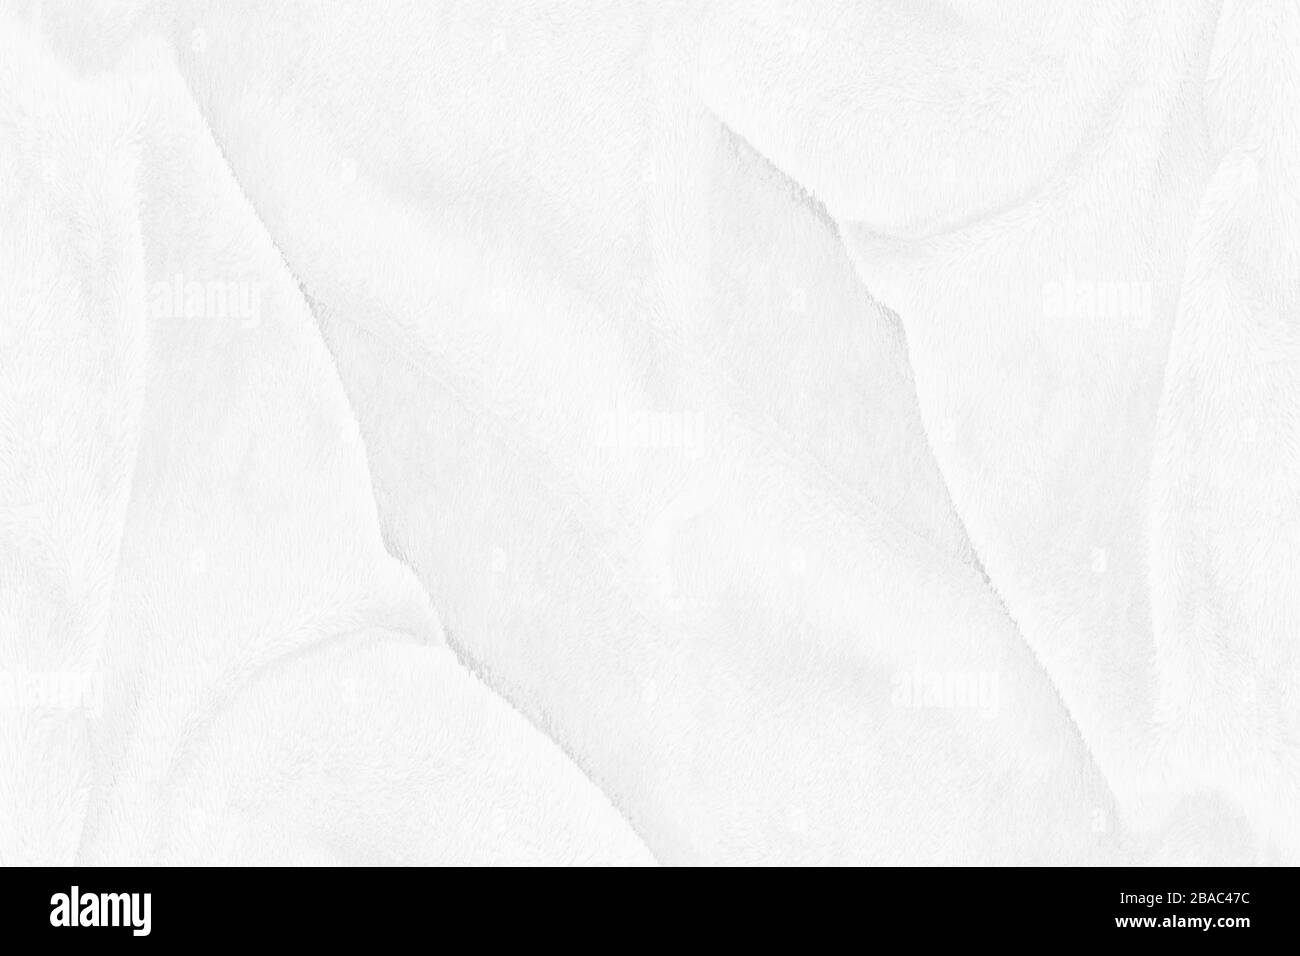 White cloth texture with soft waves. crumpled fabric background. Stock Photo